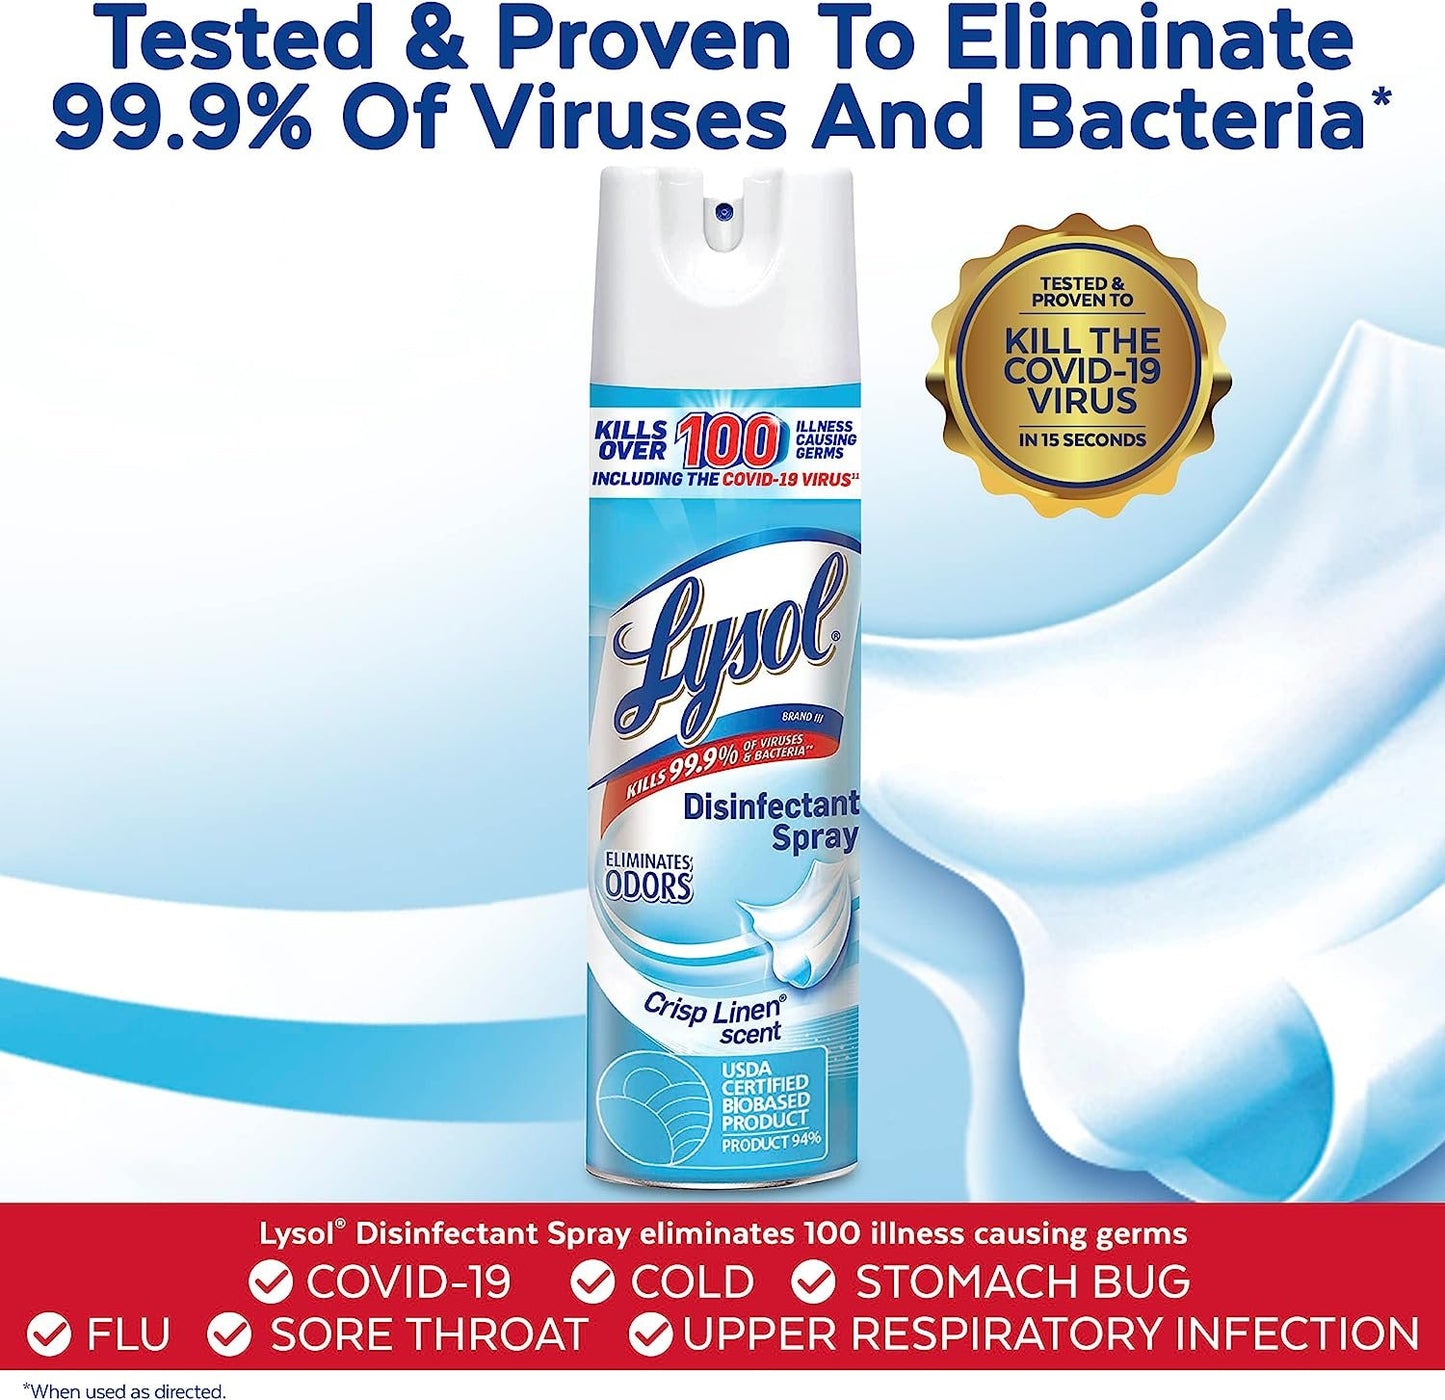 Lysol Disinfectant Spray, Sanitizing and Antibacterial Spray, For Disinfecting and Deodorizing, Crisp Linen, 19 fl oz (Pack of 12)